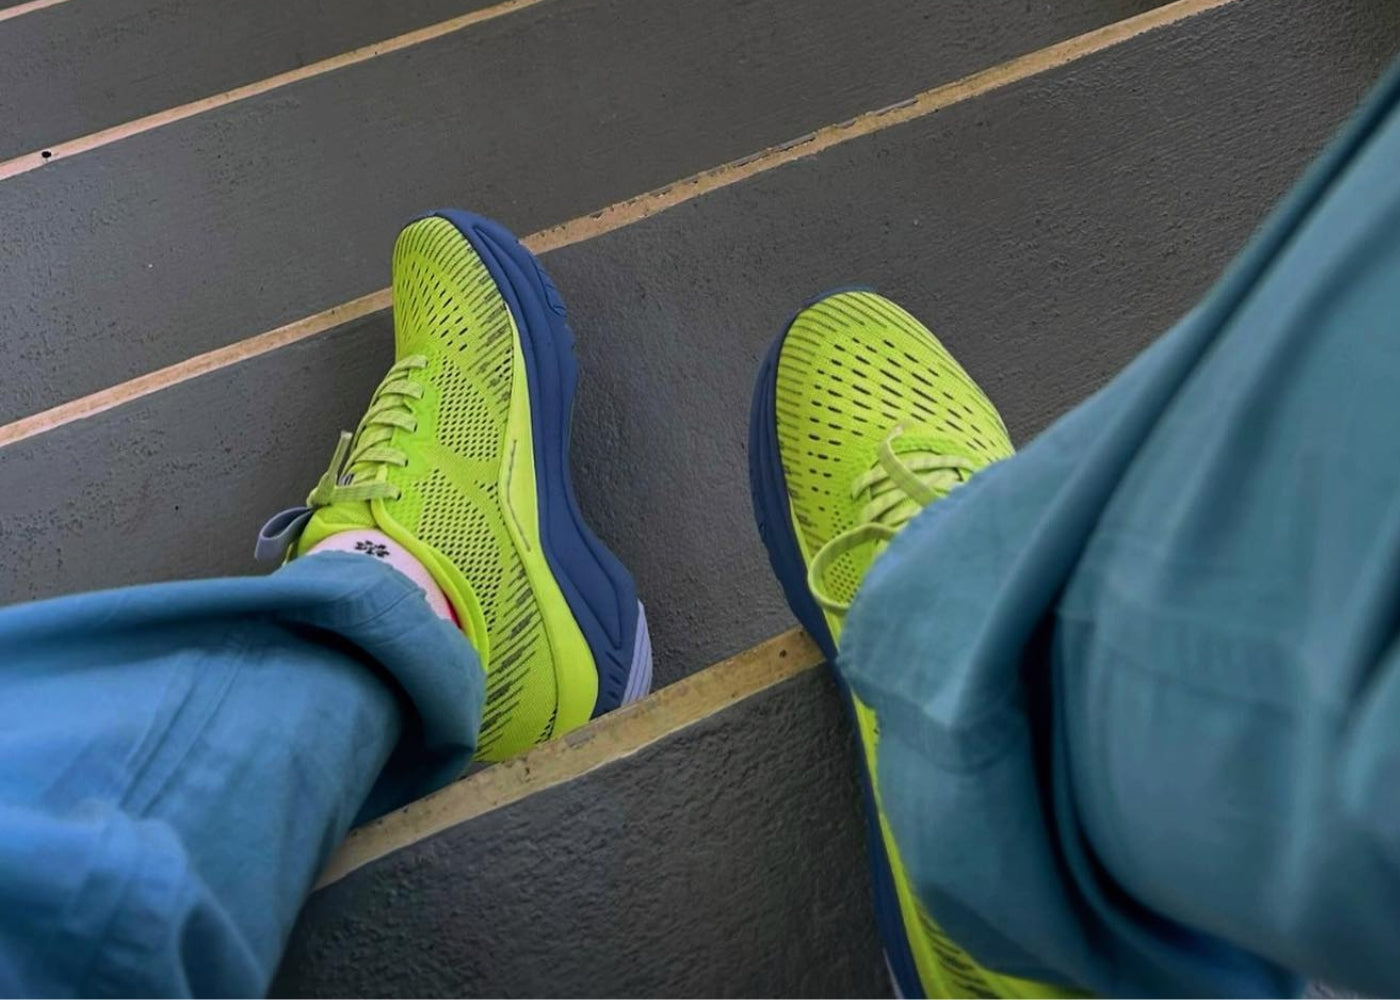 User generated content of healthcare professional showing off bright yellow sneakers on a staircase.